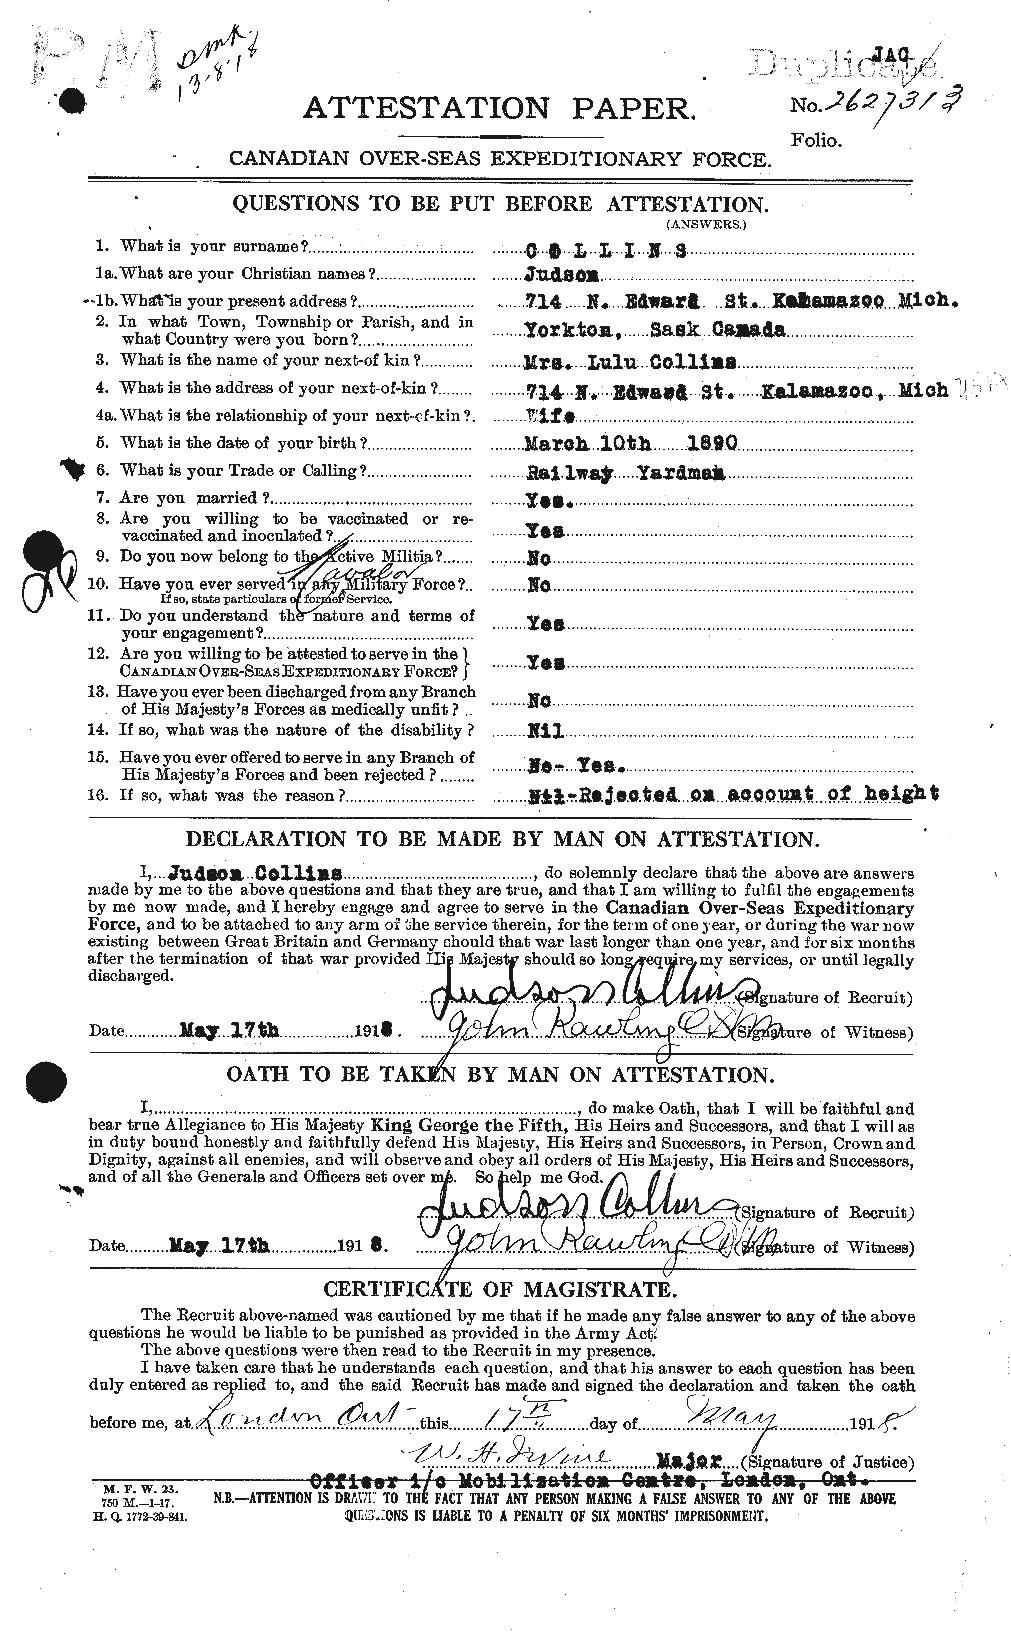 Personnel Records of the First World War - CEF 069505a